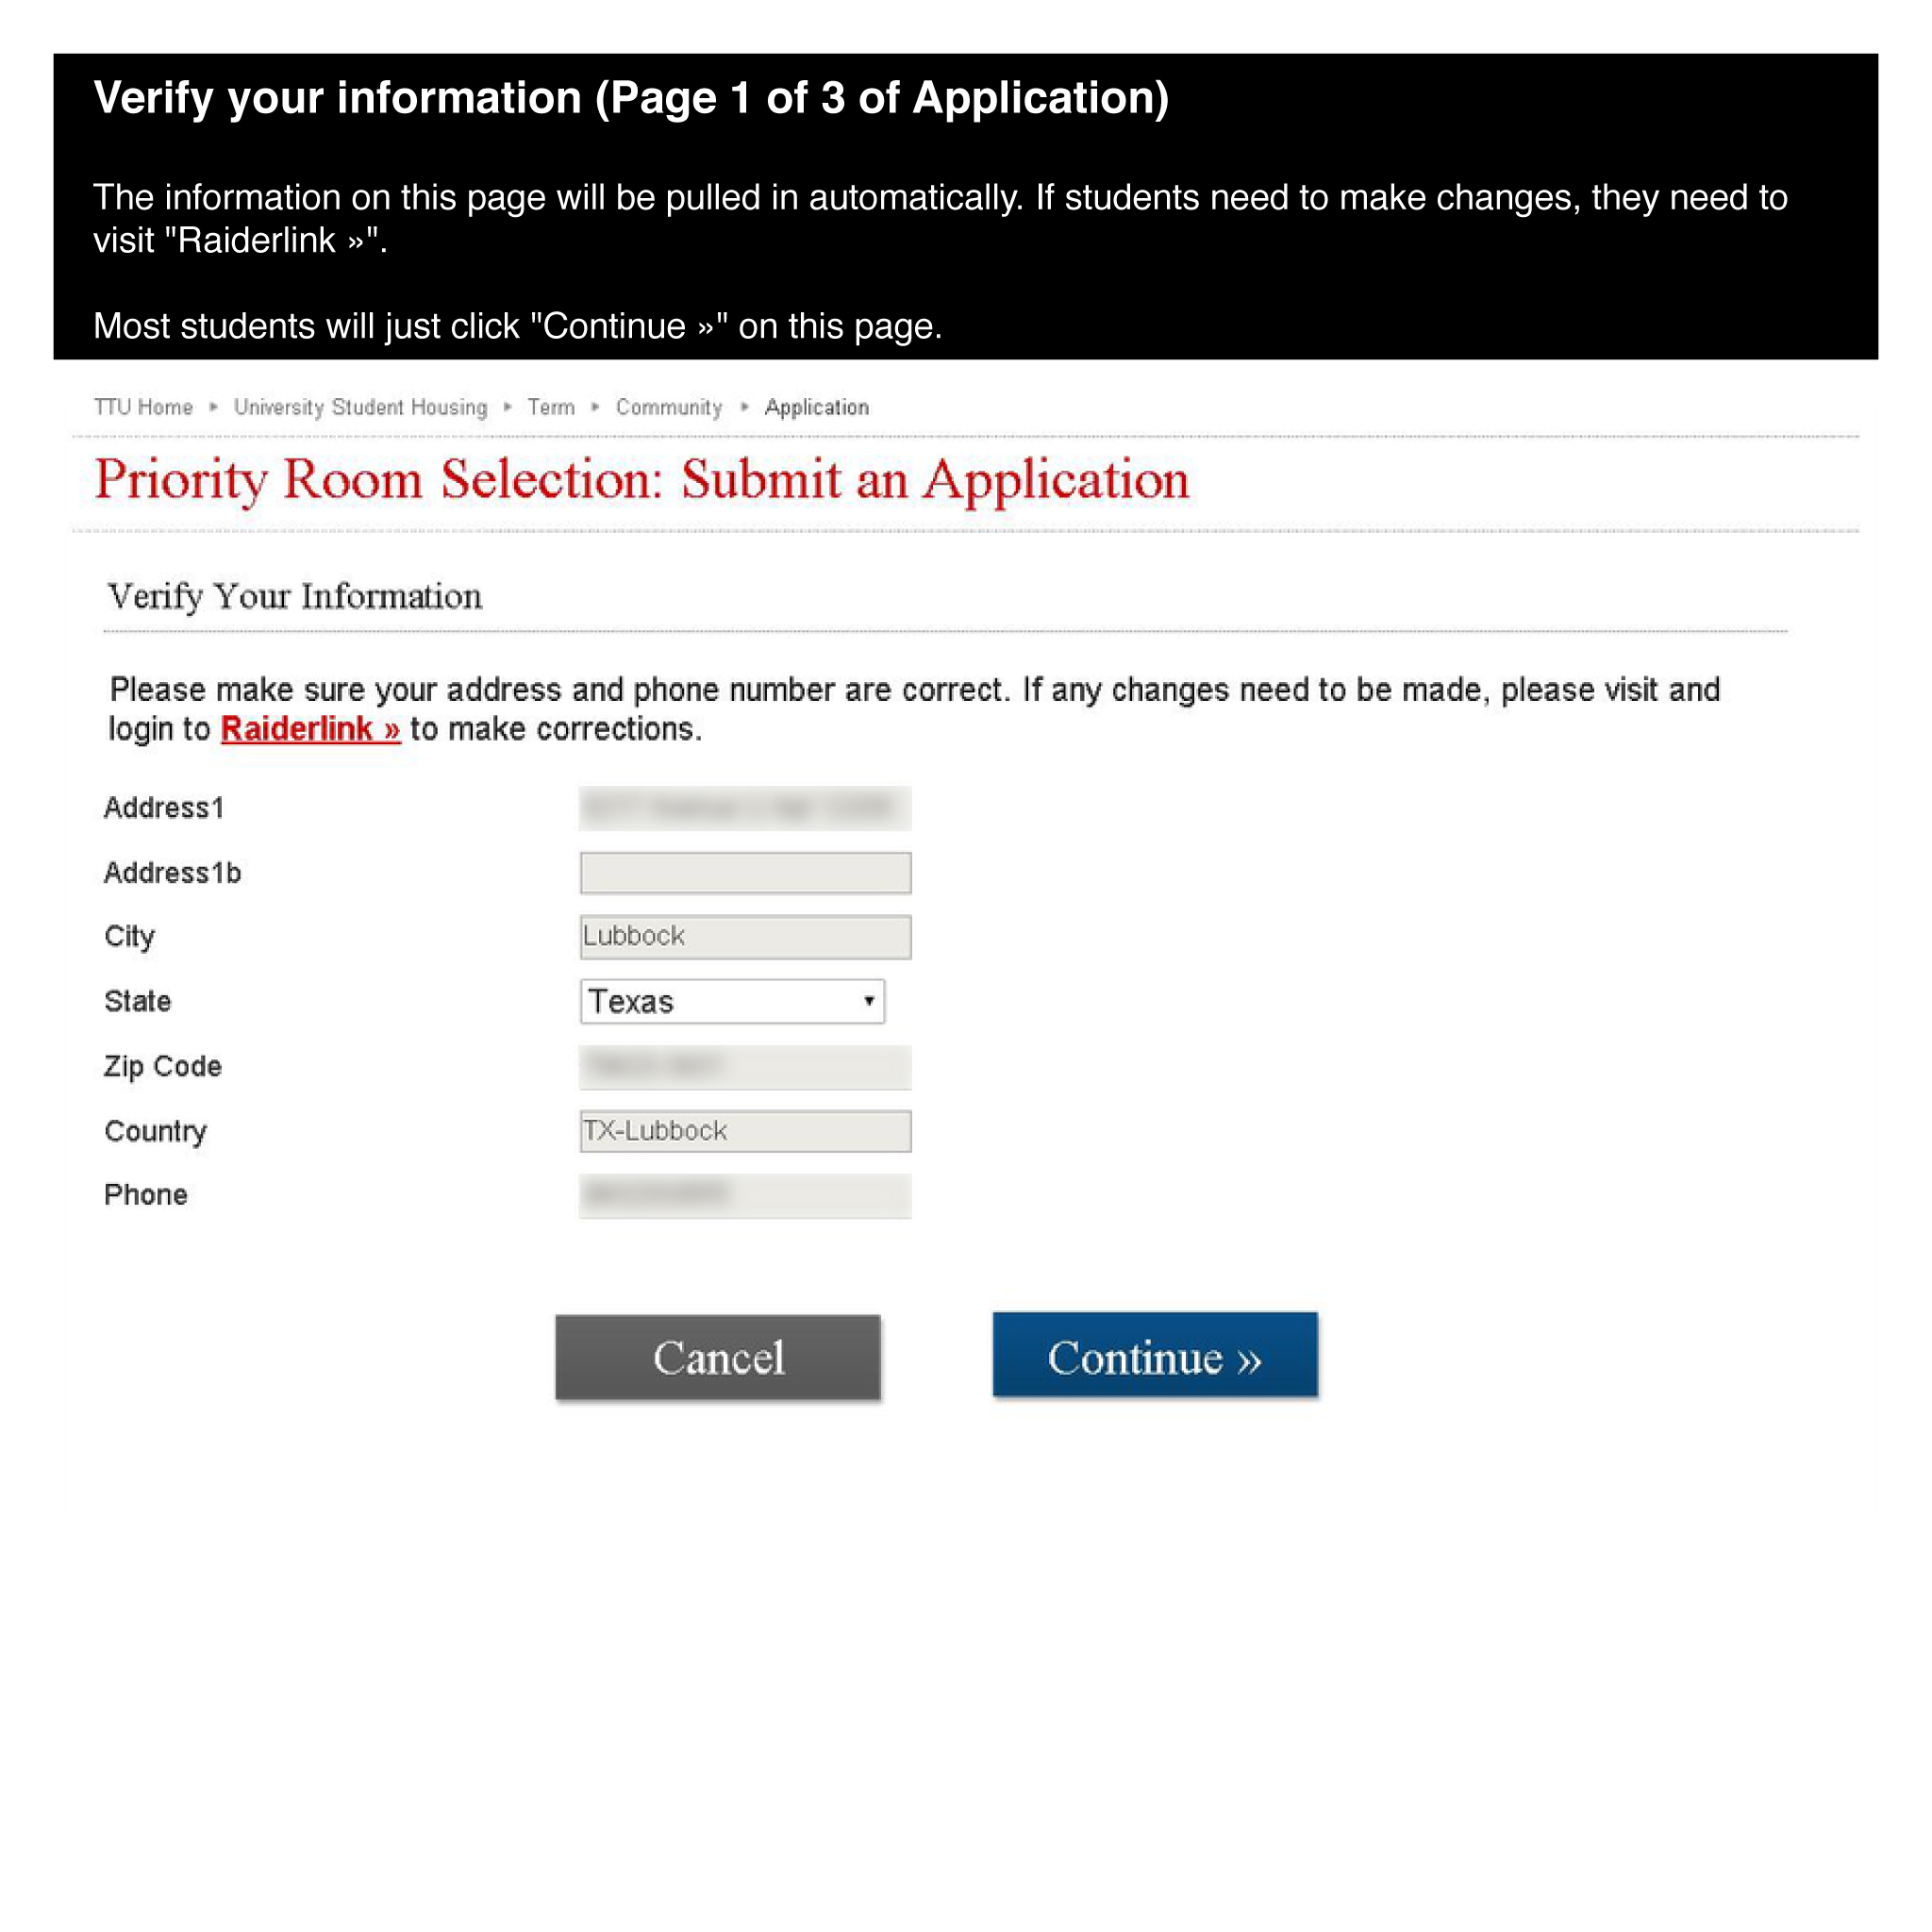 Verify your information (Page 1 of 3 of Application)